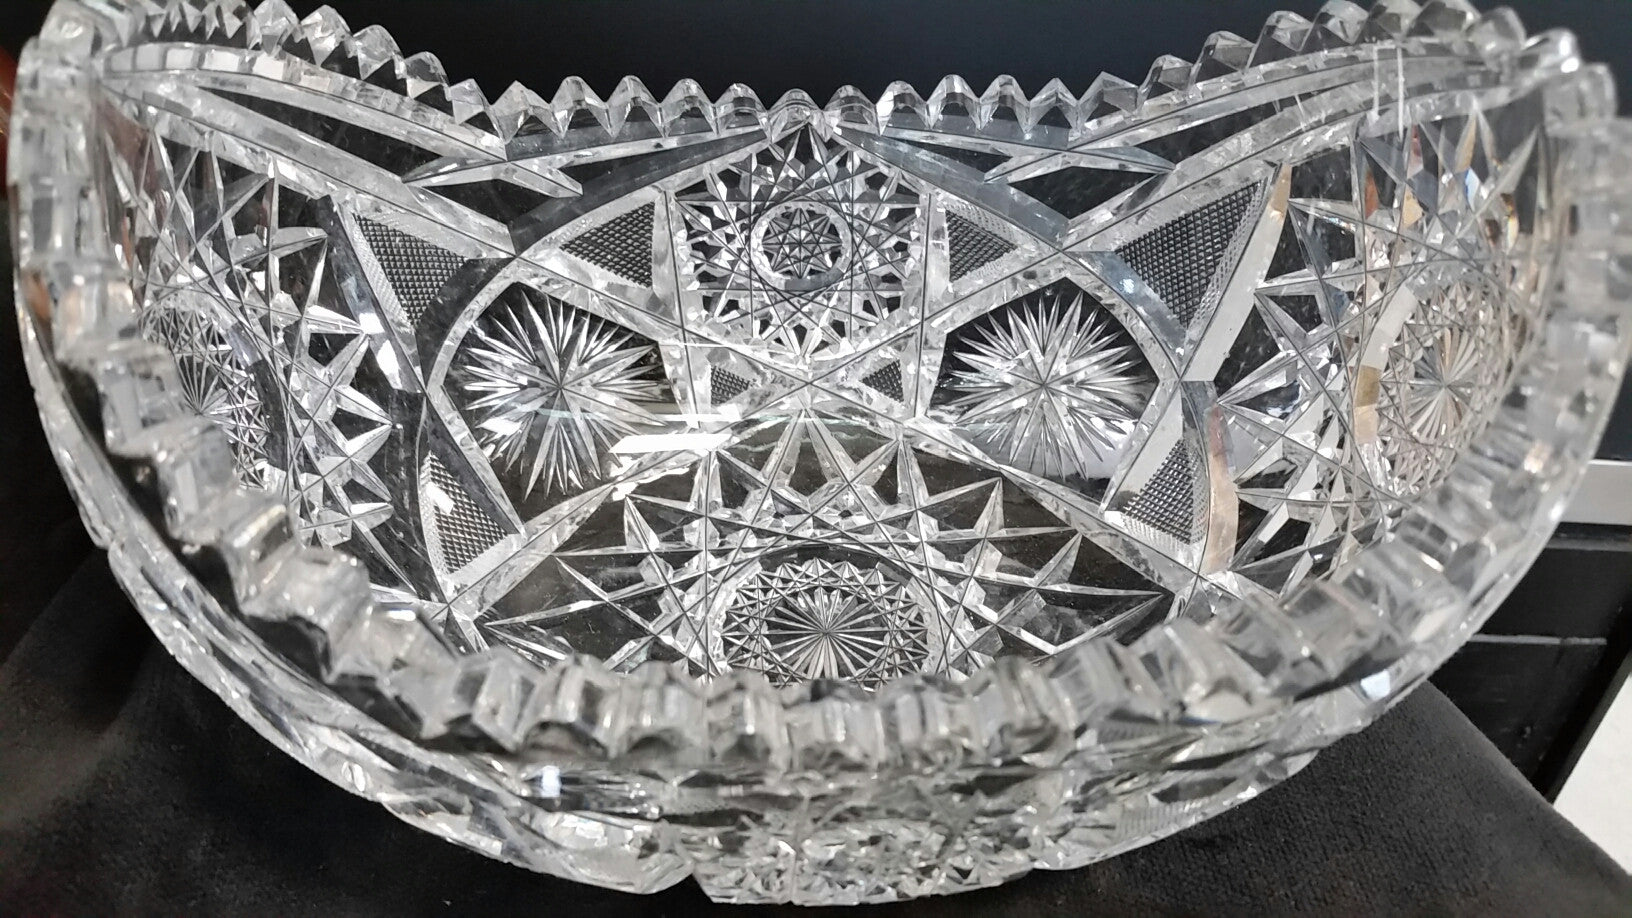 ABP CUT glass orange bowl antique - O'Rourke crystal awards & gifts abp cut glass